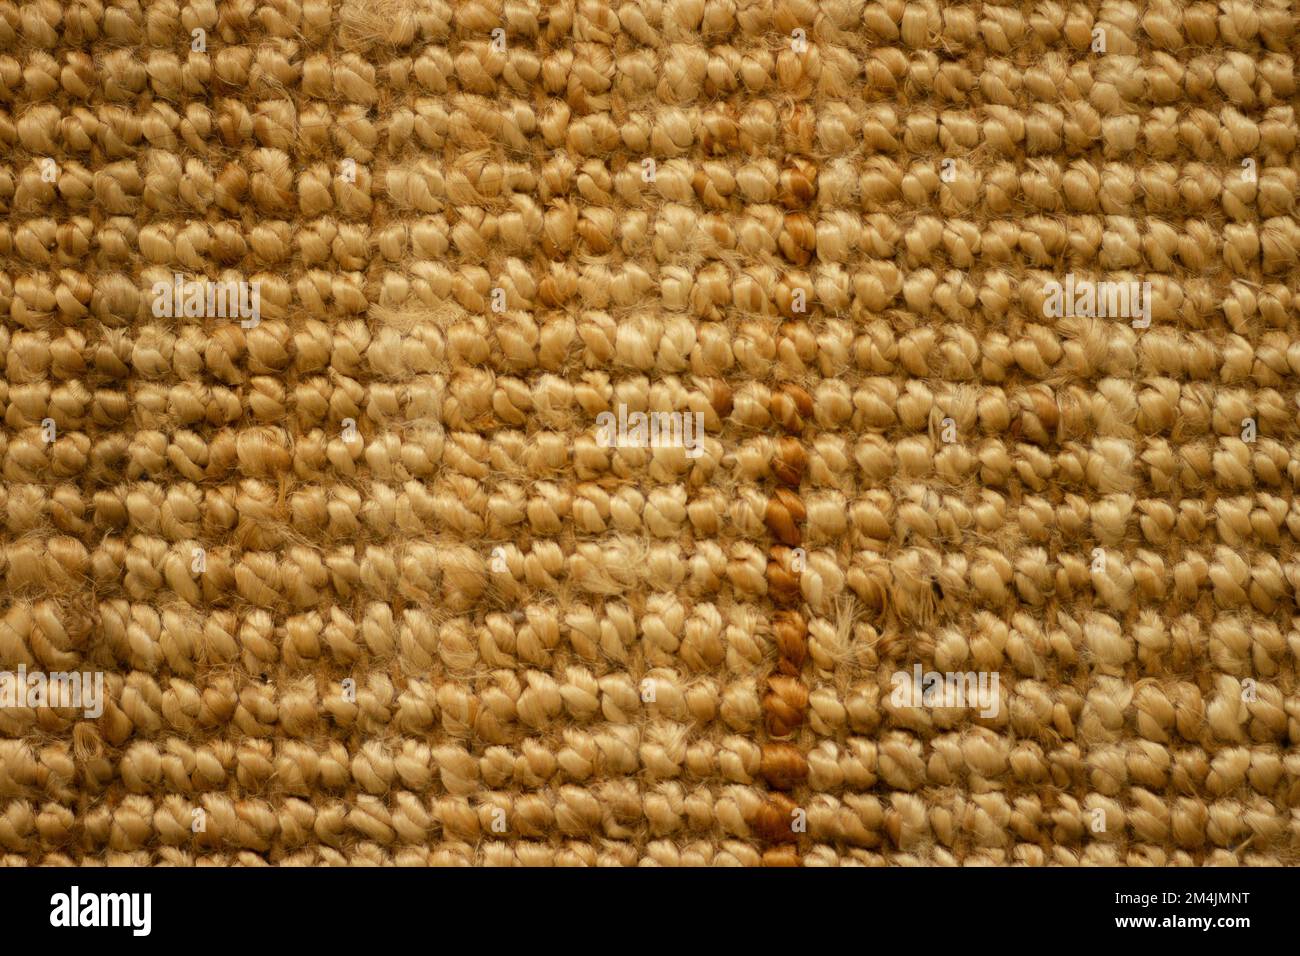 wicker background, natural straw woven floor rug Stock Photo